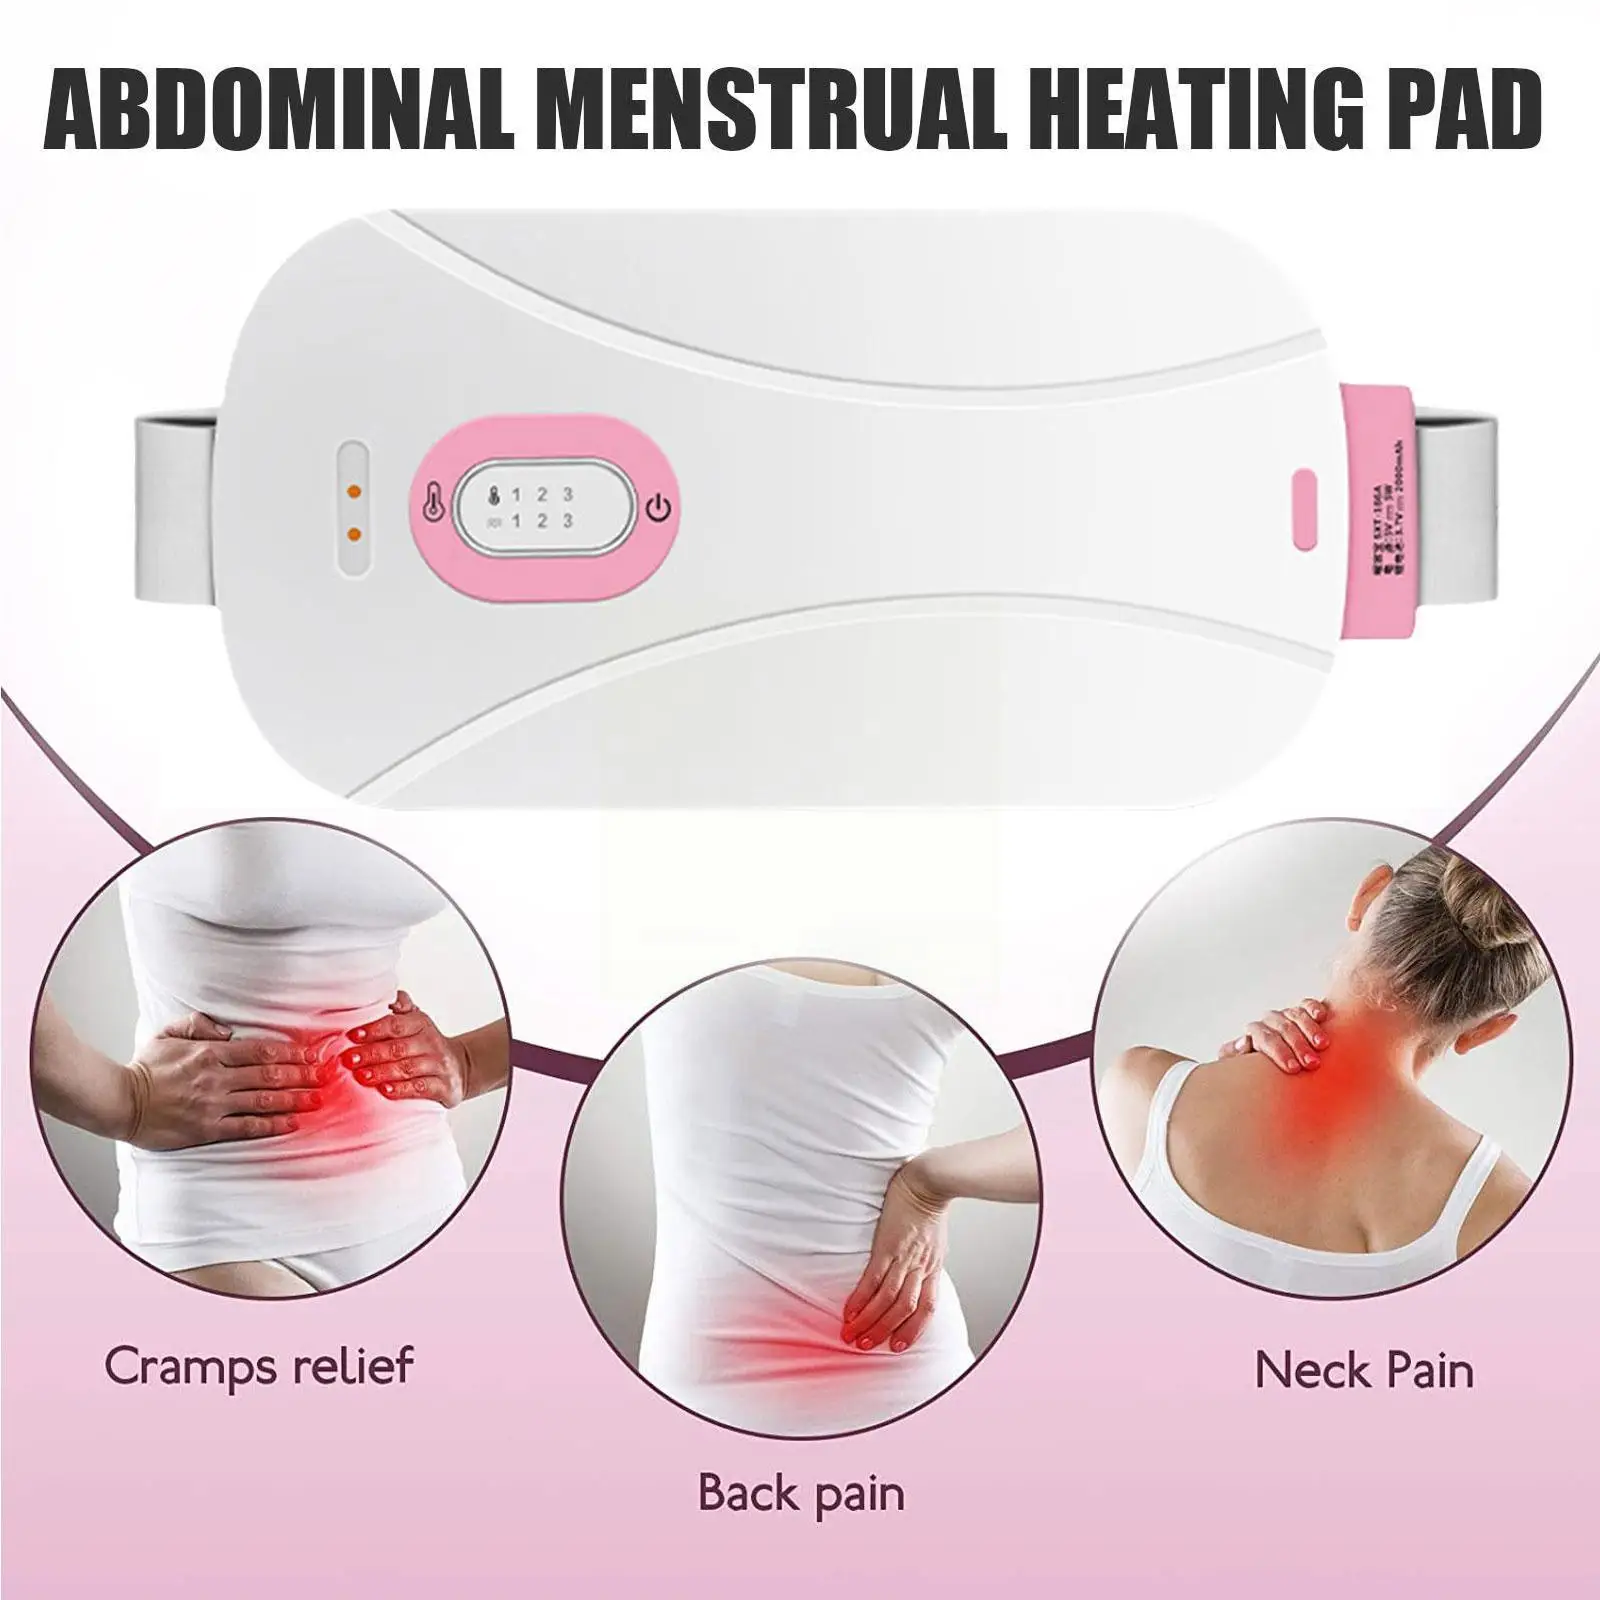 

Portable Menstrual Cordless Heating Pad Electric Heating Massage Pad For Back Stomach Pain Relief Period Cramps Belly Warm I2E4